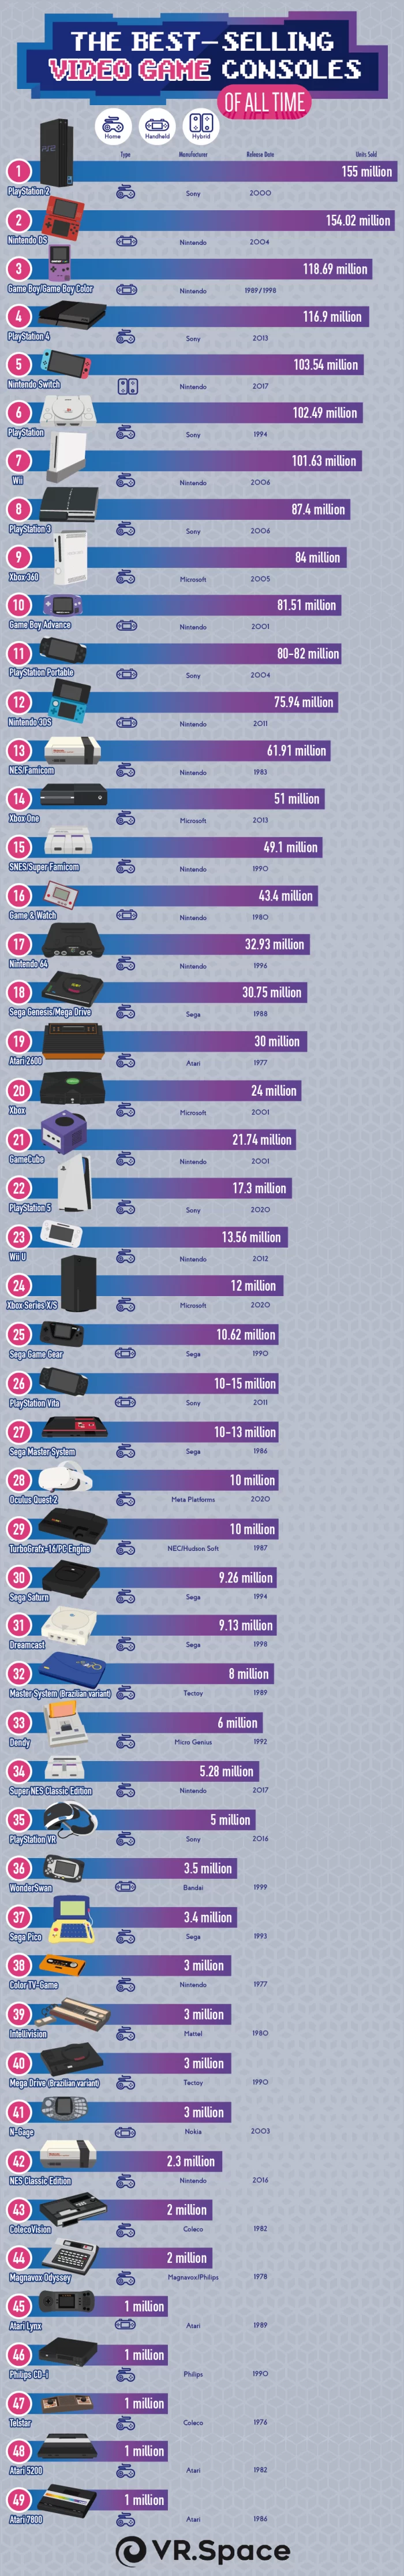 Best-Selling Video Game Consoles of All Time